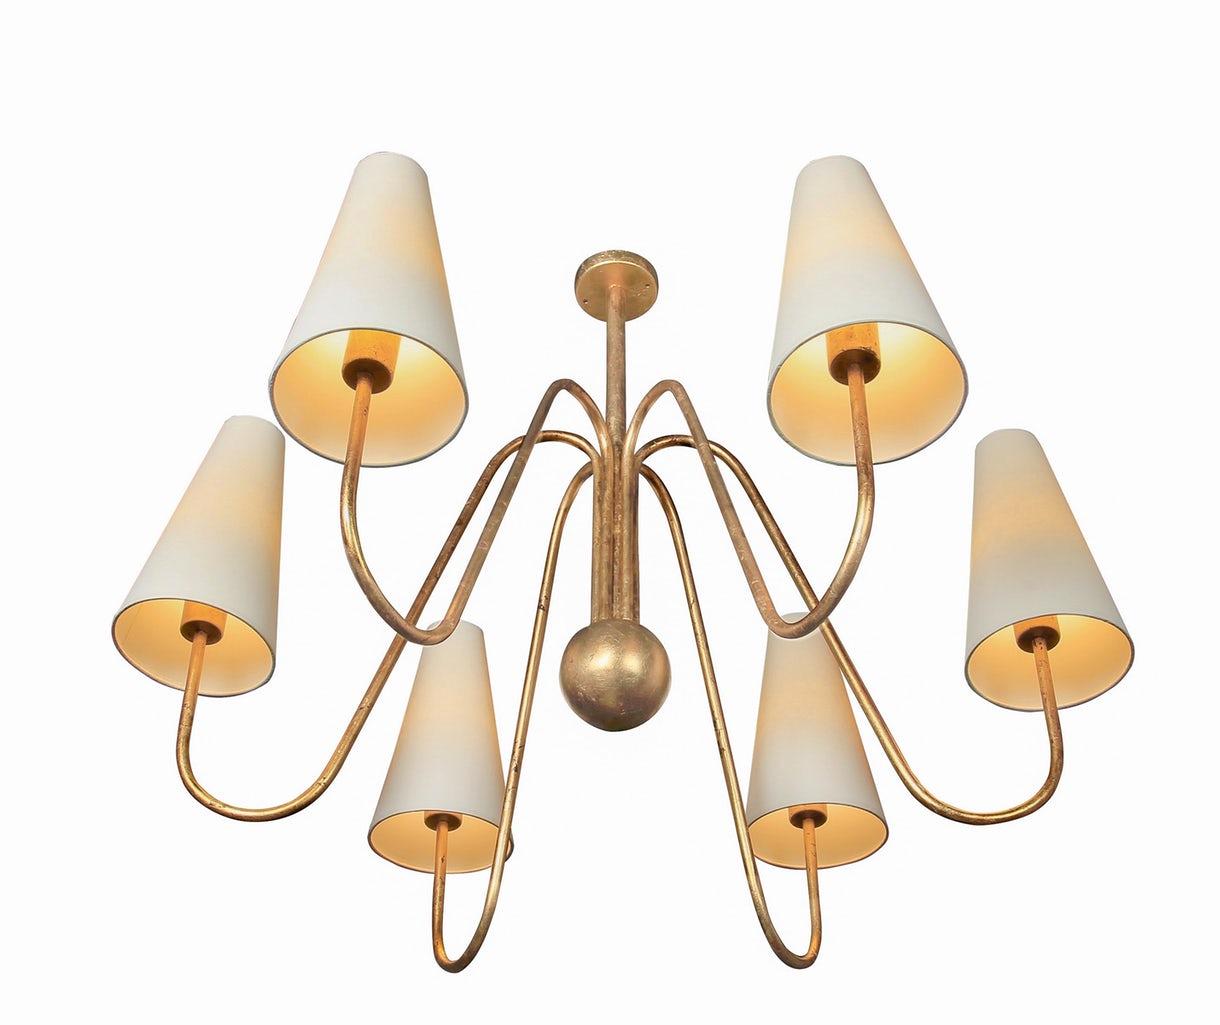 Edition modern six-arm gold-leaf chandelier. Executed in high quality gold-leafed metal with rigid parchment shades, this ultra refined design adds a sculptural element and focal point of incomparable beauty.

Price is per item. Current variant